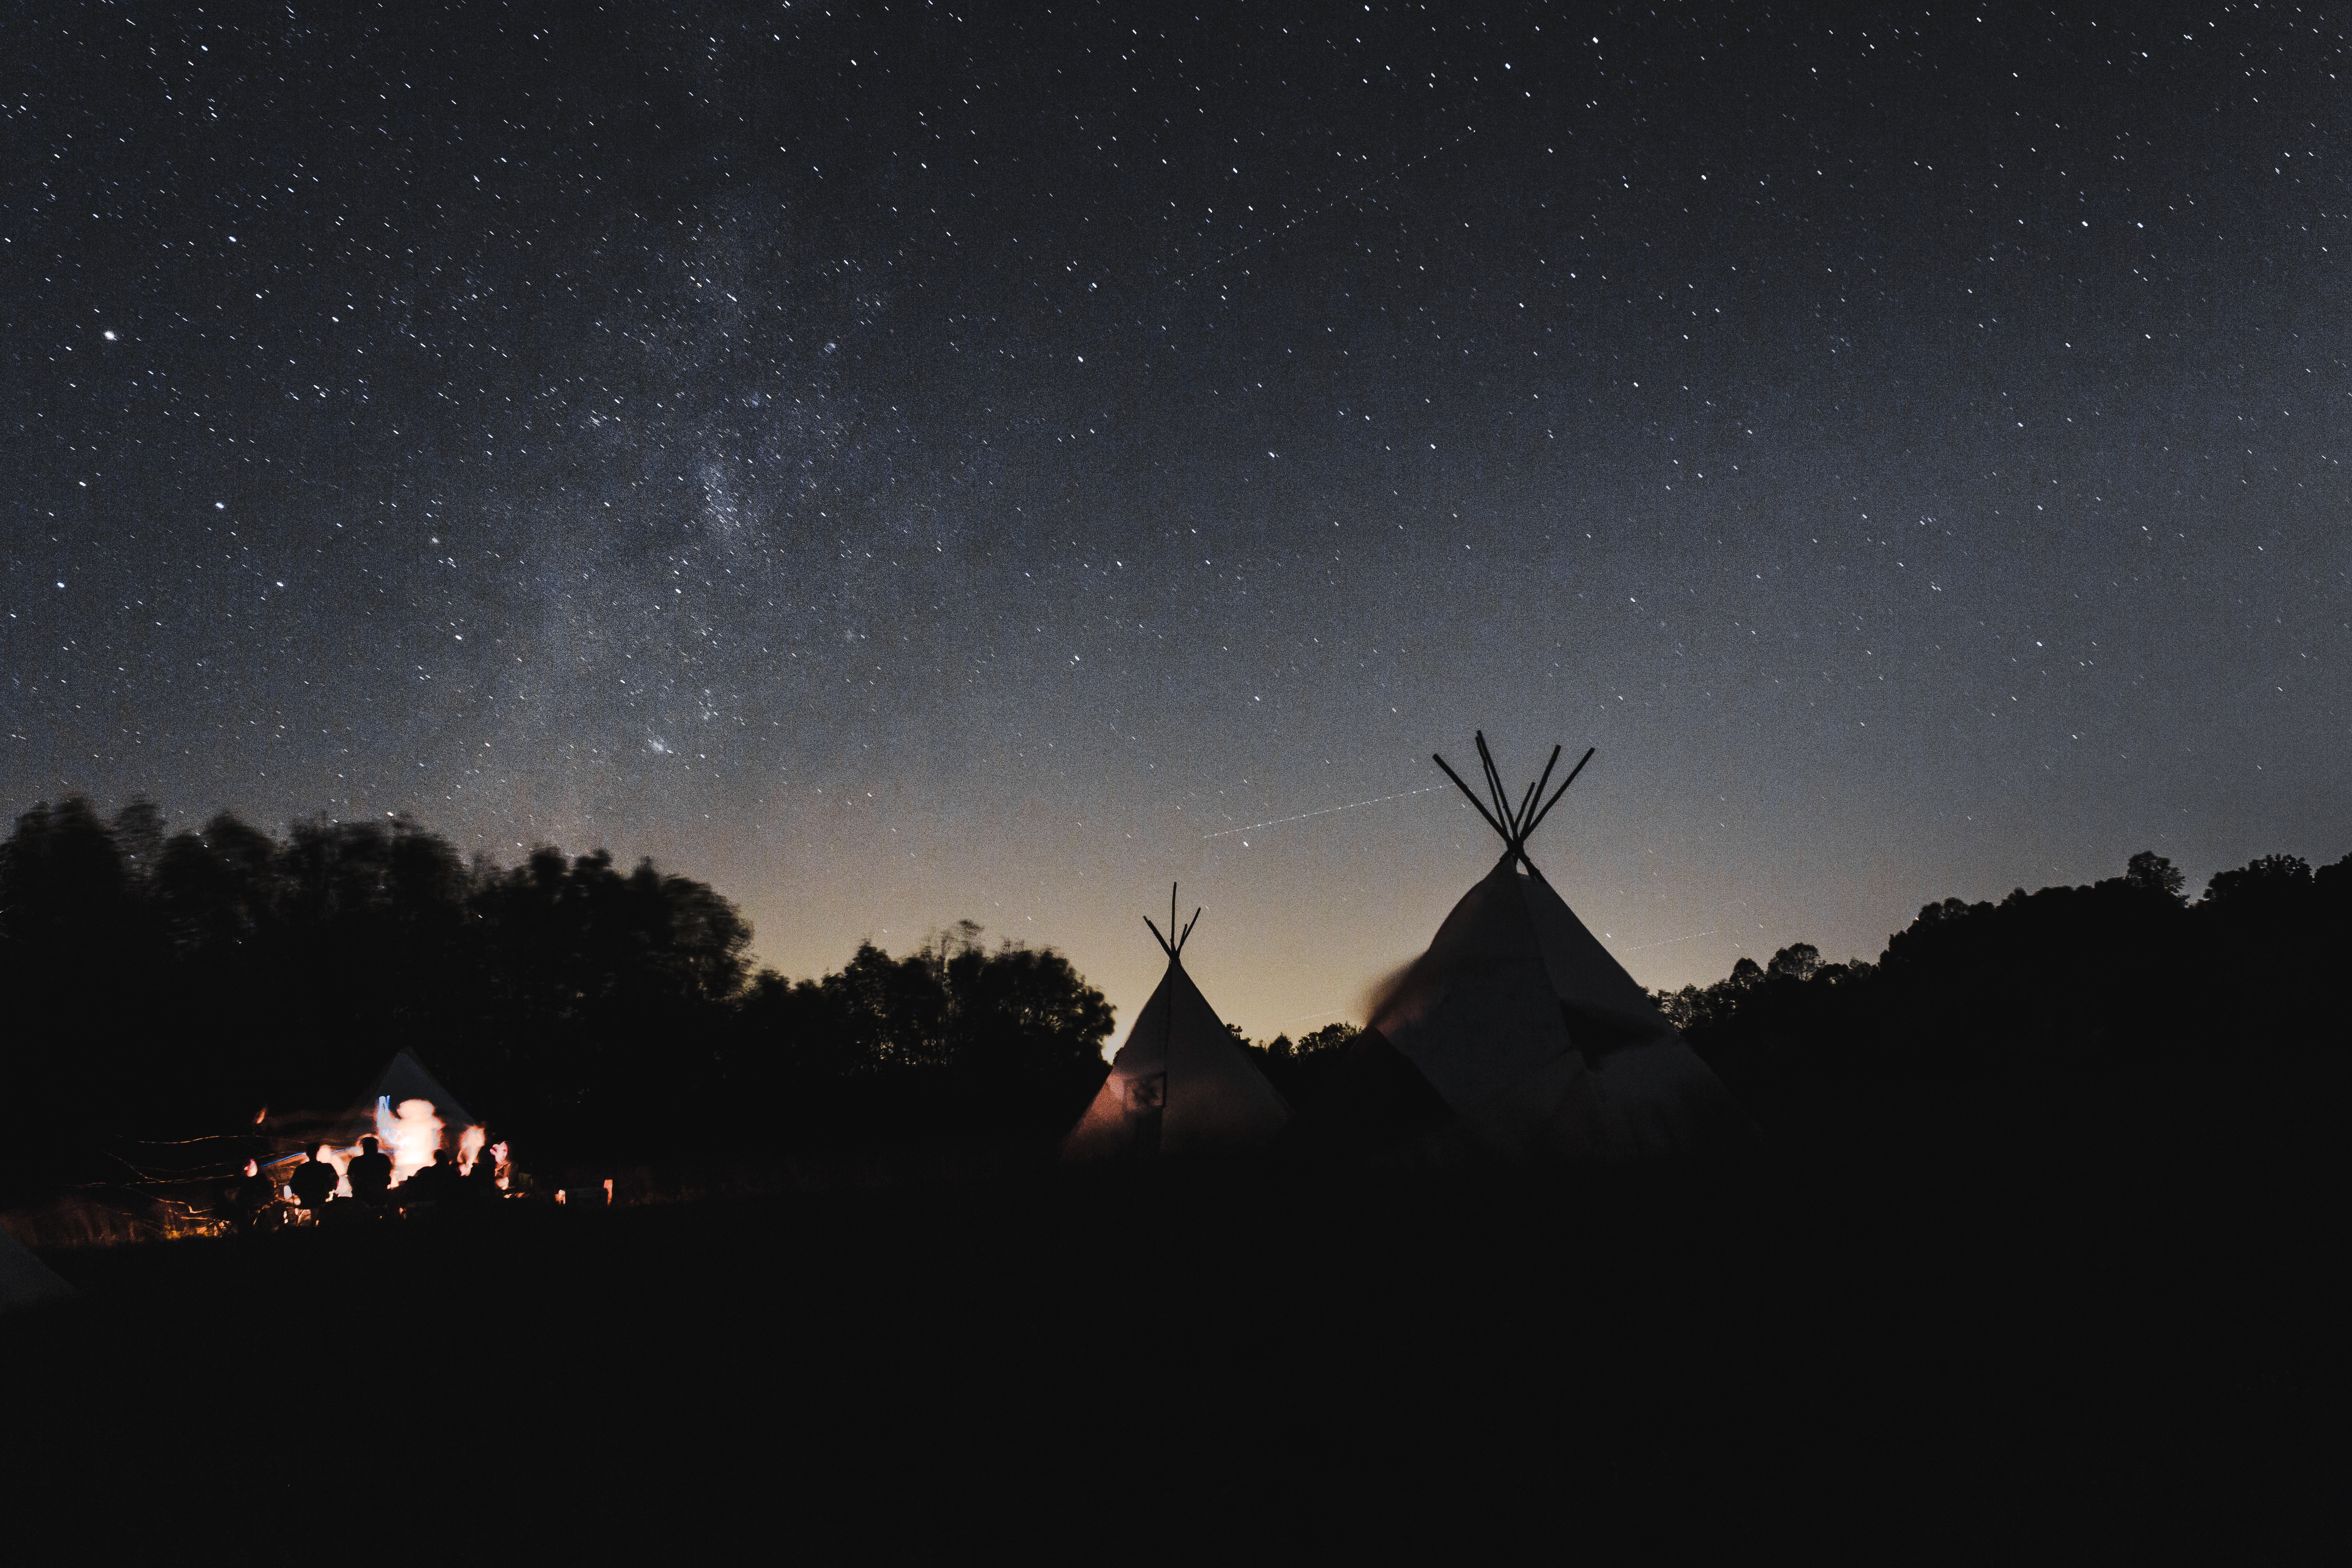 tipi tents on mountain during nighttime